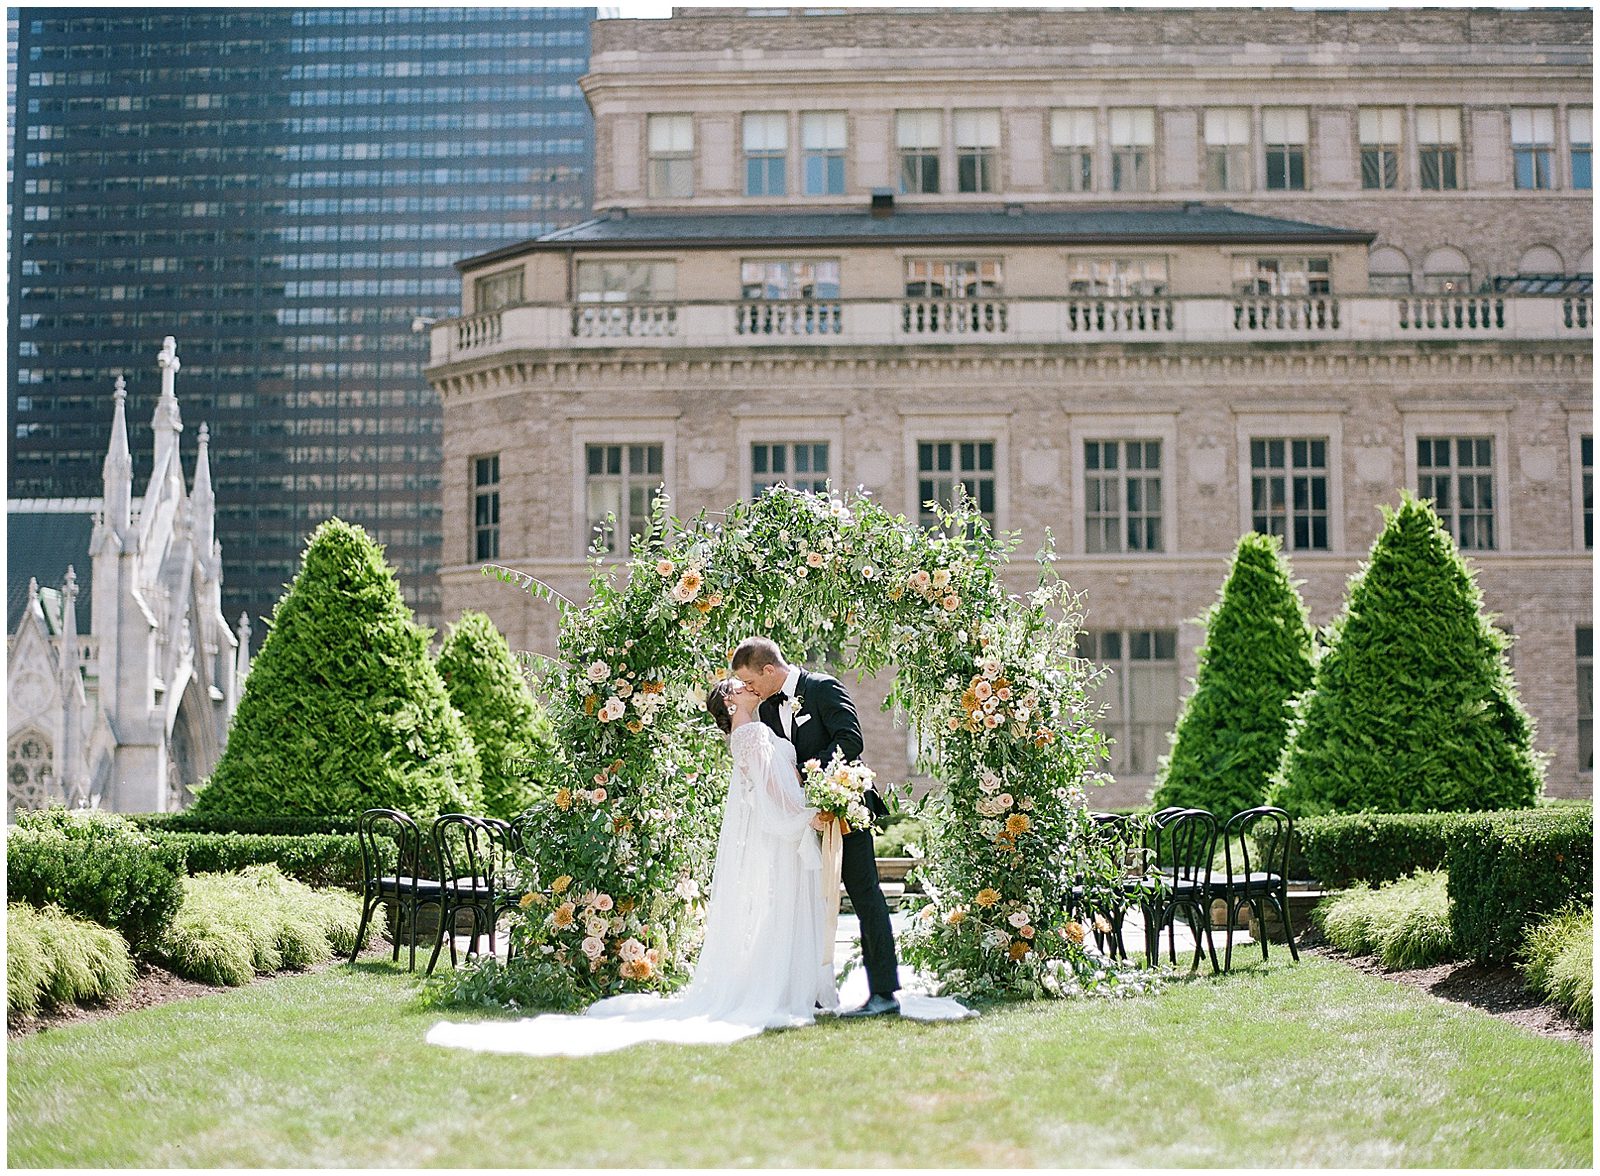 Bride and Groom Kissing at Flower Arch at New York City Wedding Venue 620 Loft and Garden Photo